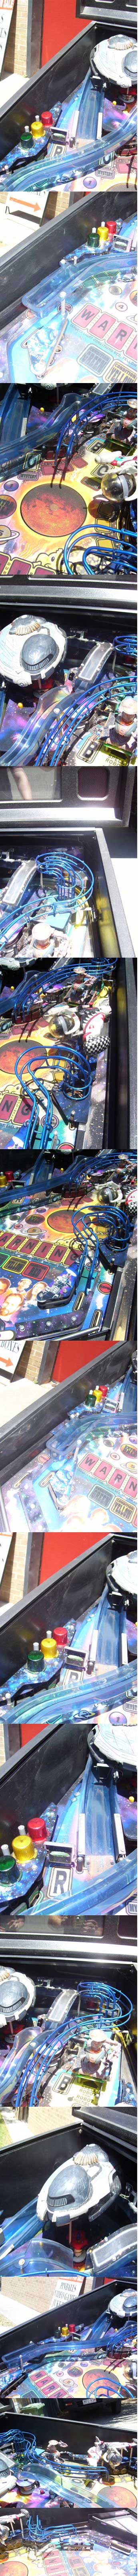 Lost In Space Pinball By Sega